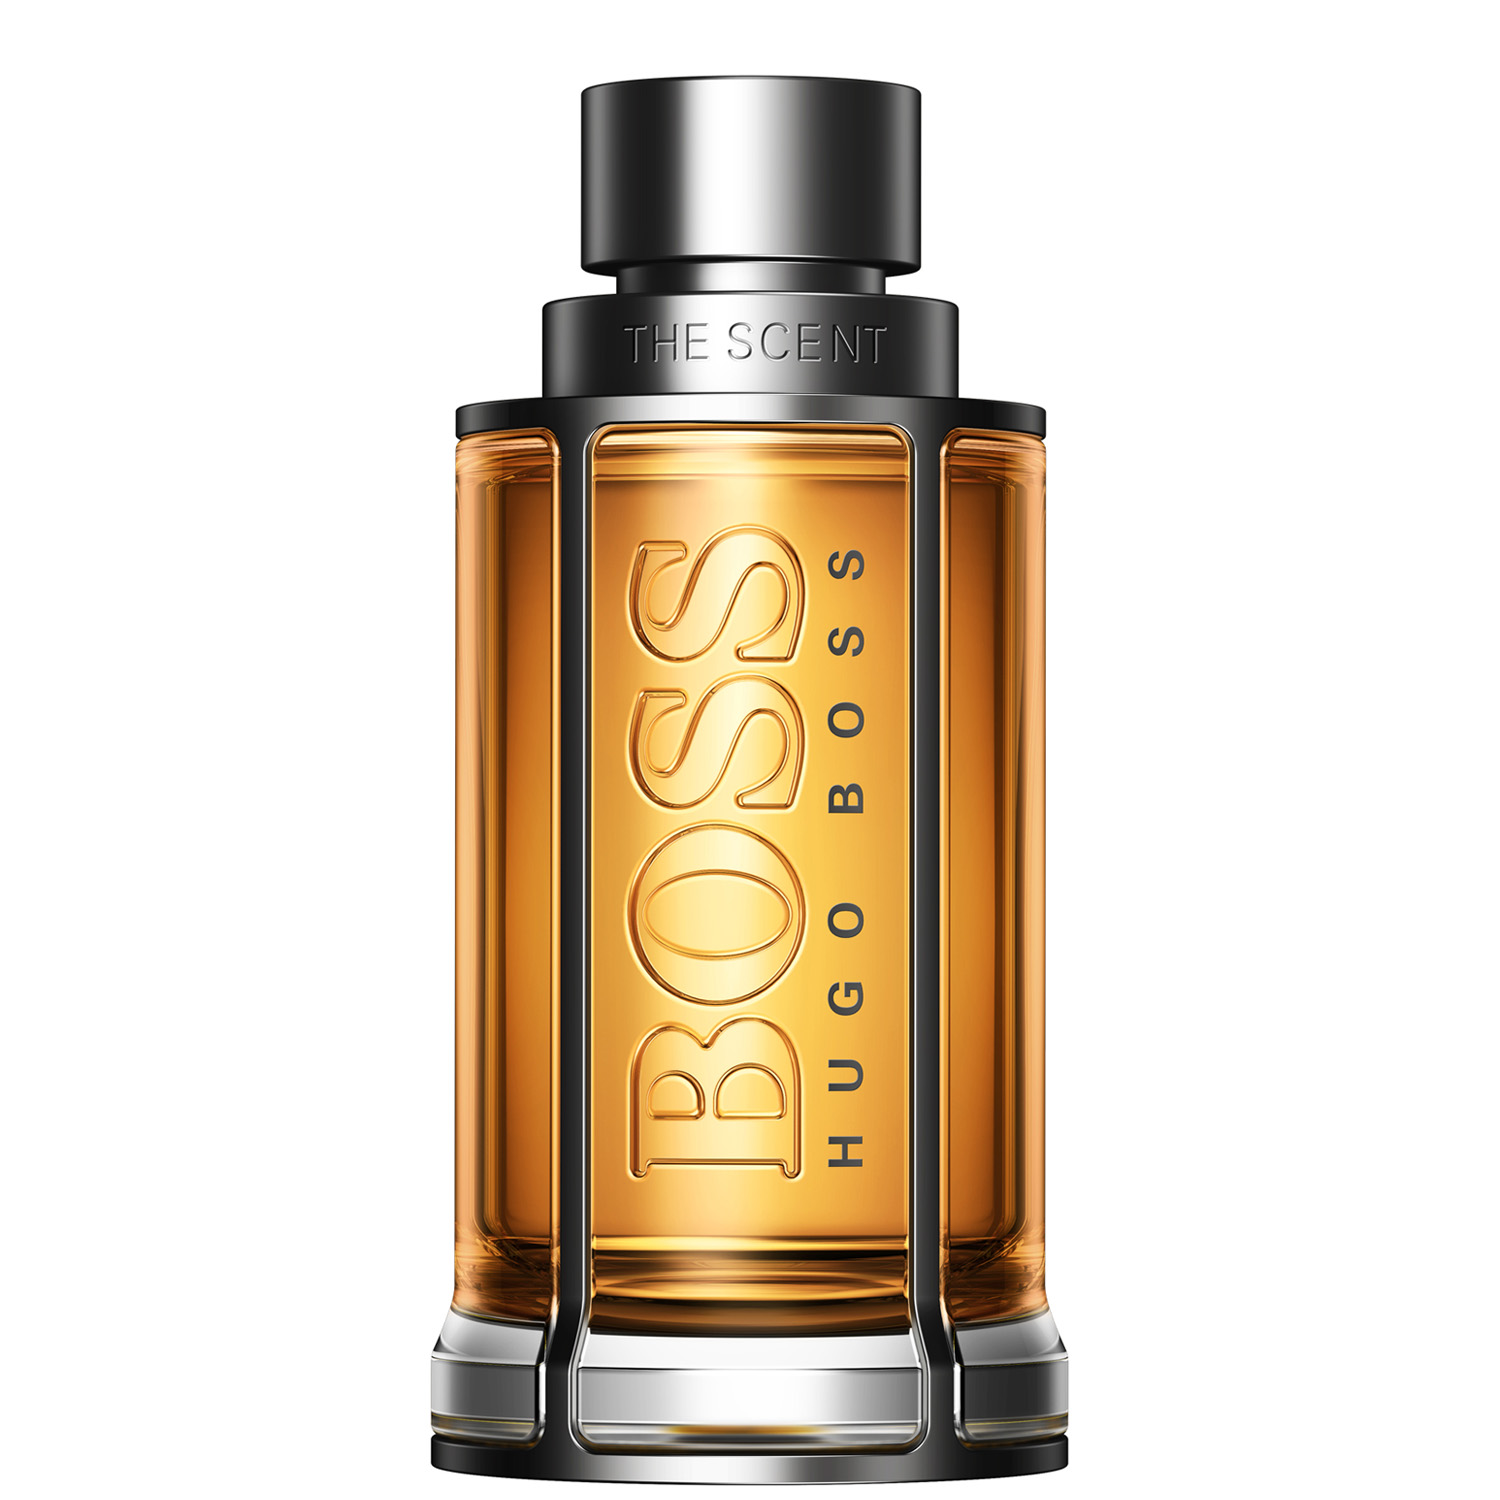 Hugo Boss The Scent After Shave Lotion 100ml